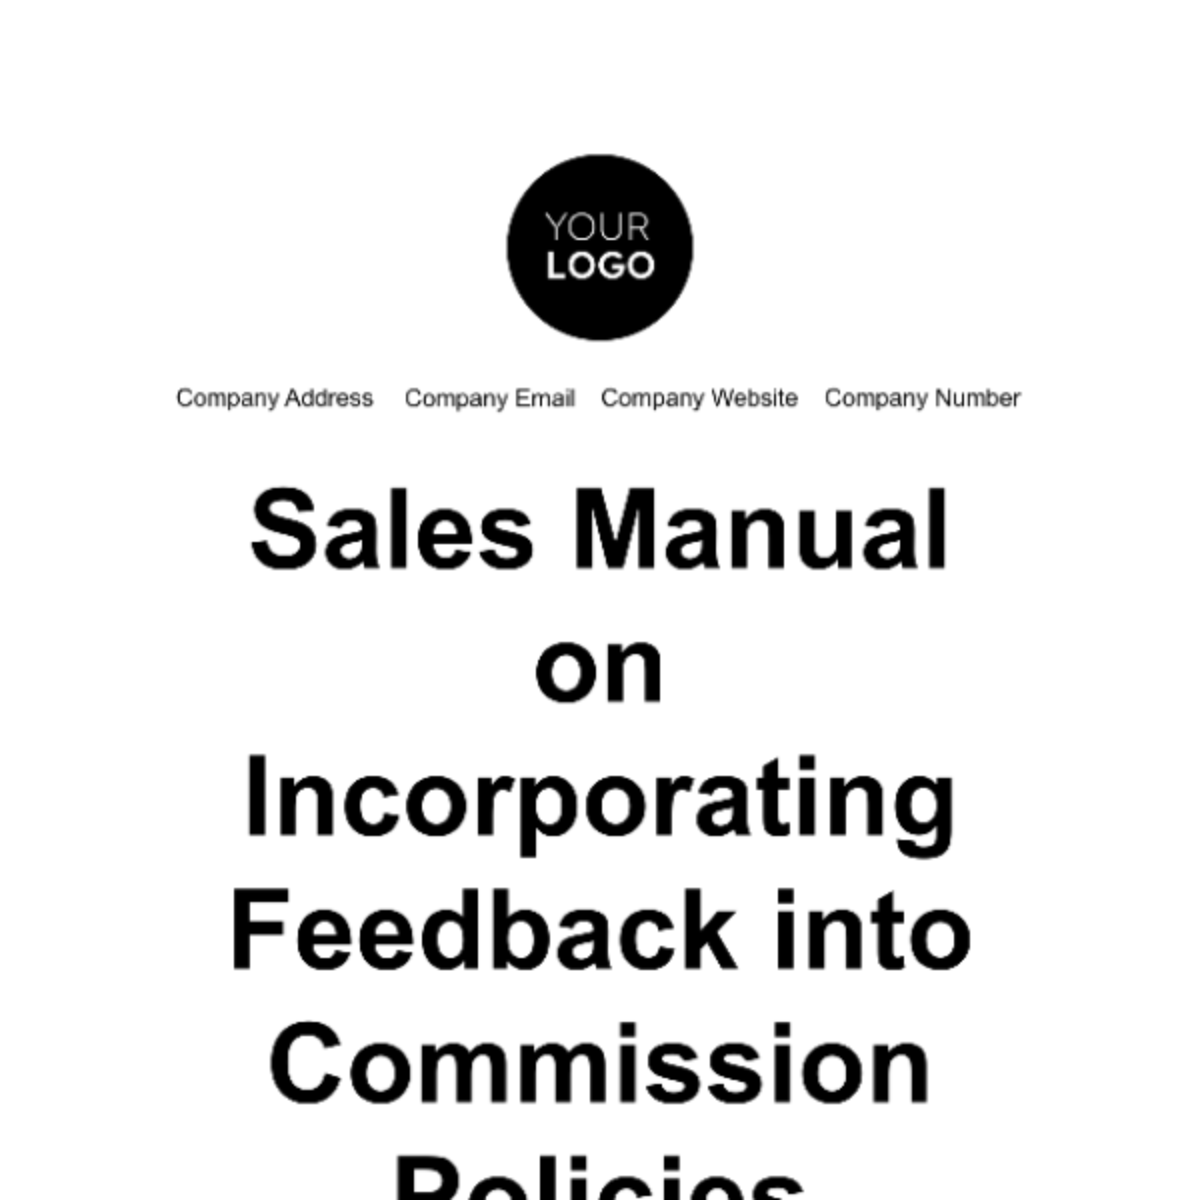 Sales Manual on Incorporating Feedback into Commission Policies Template